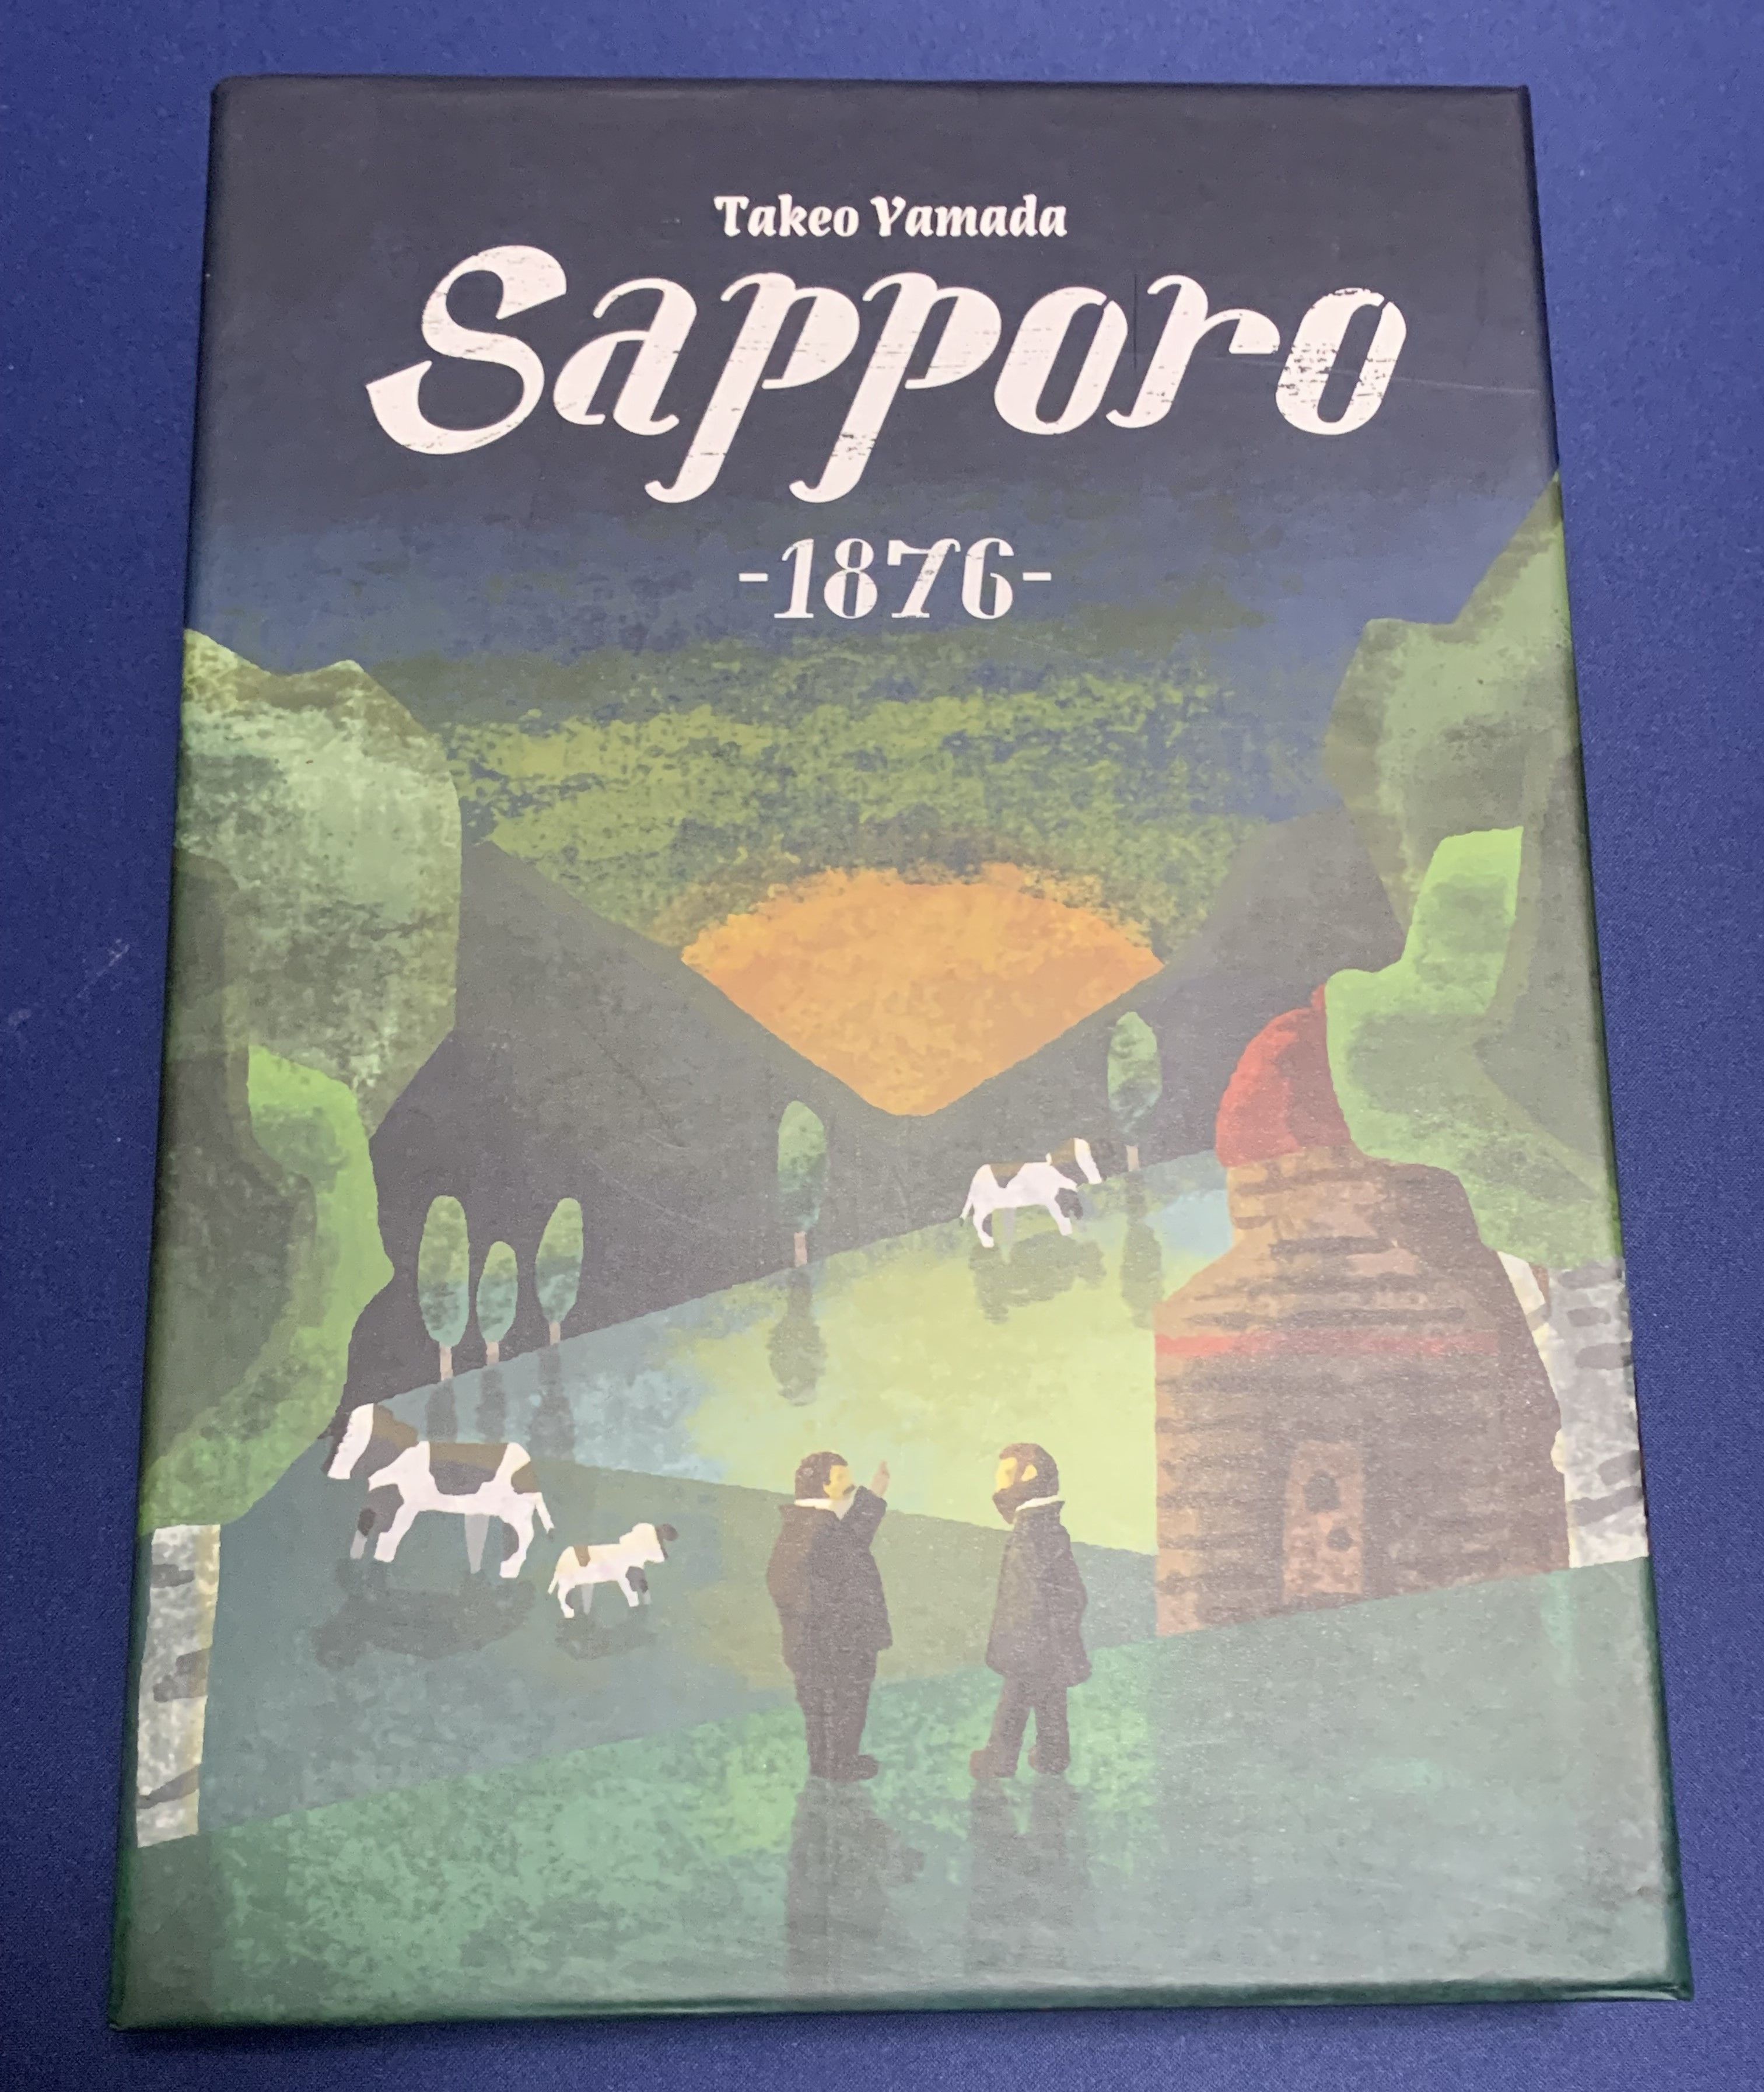 Product Details | Sapporo 1876 | GeekMarket